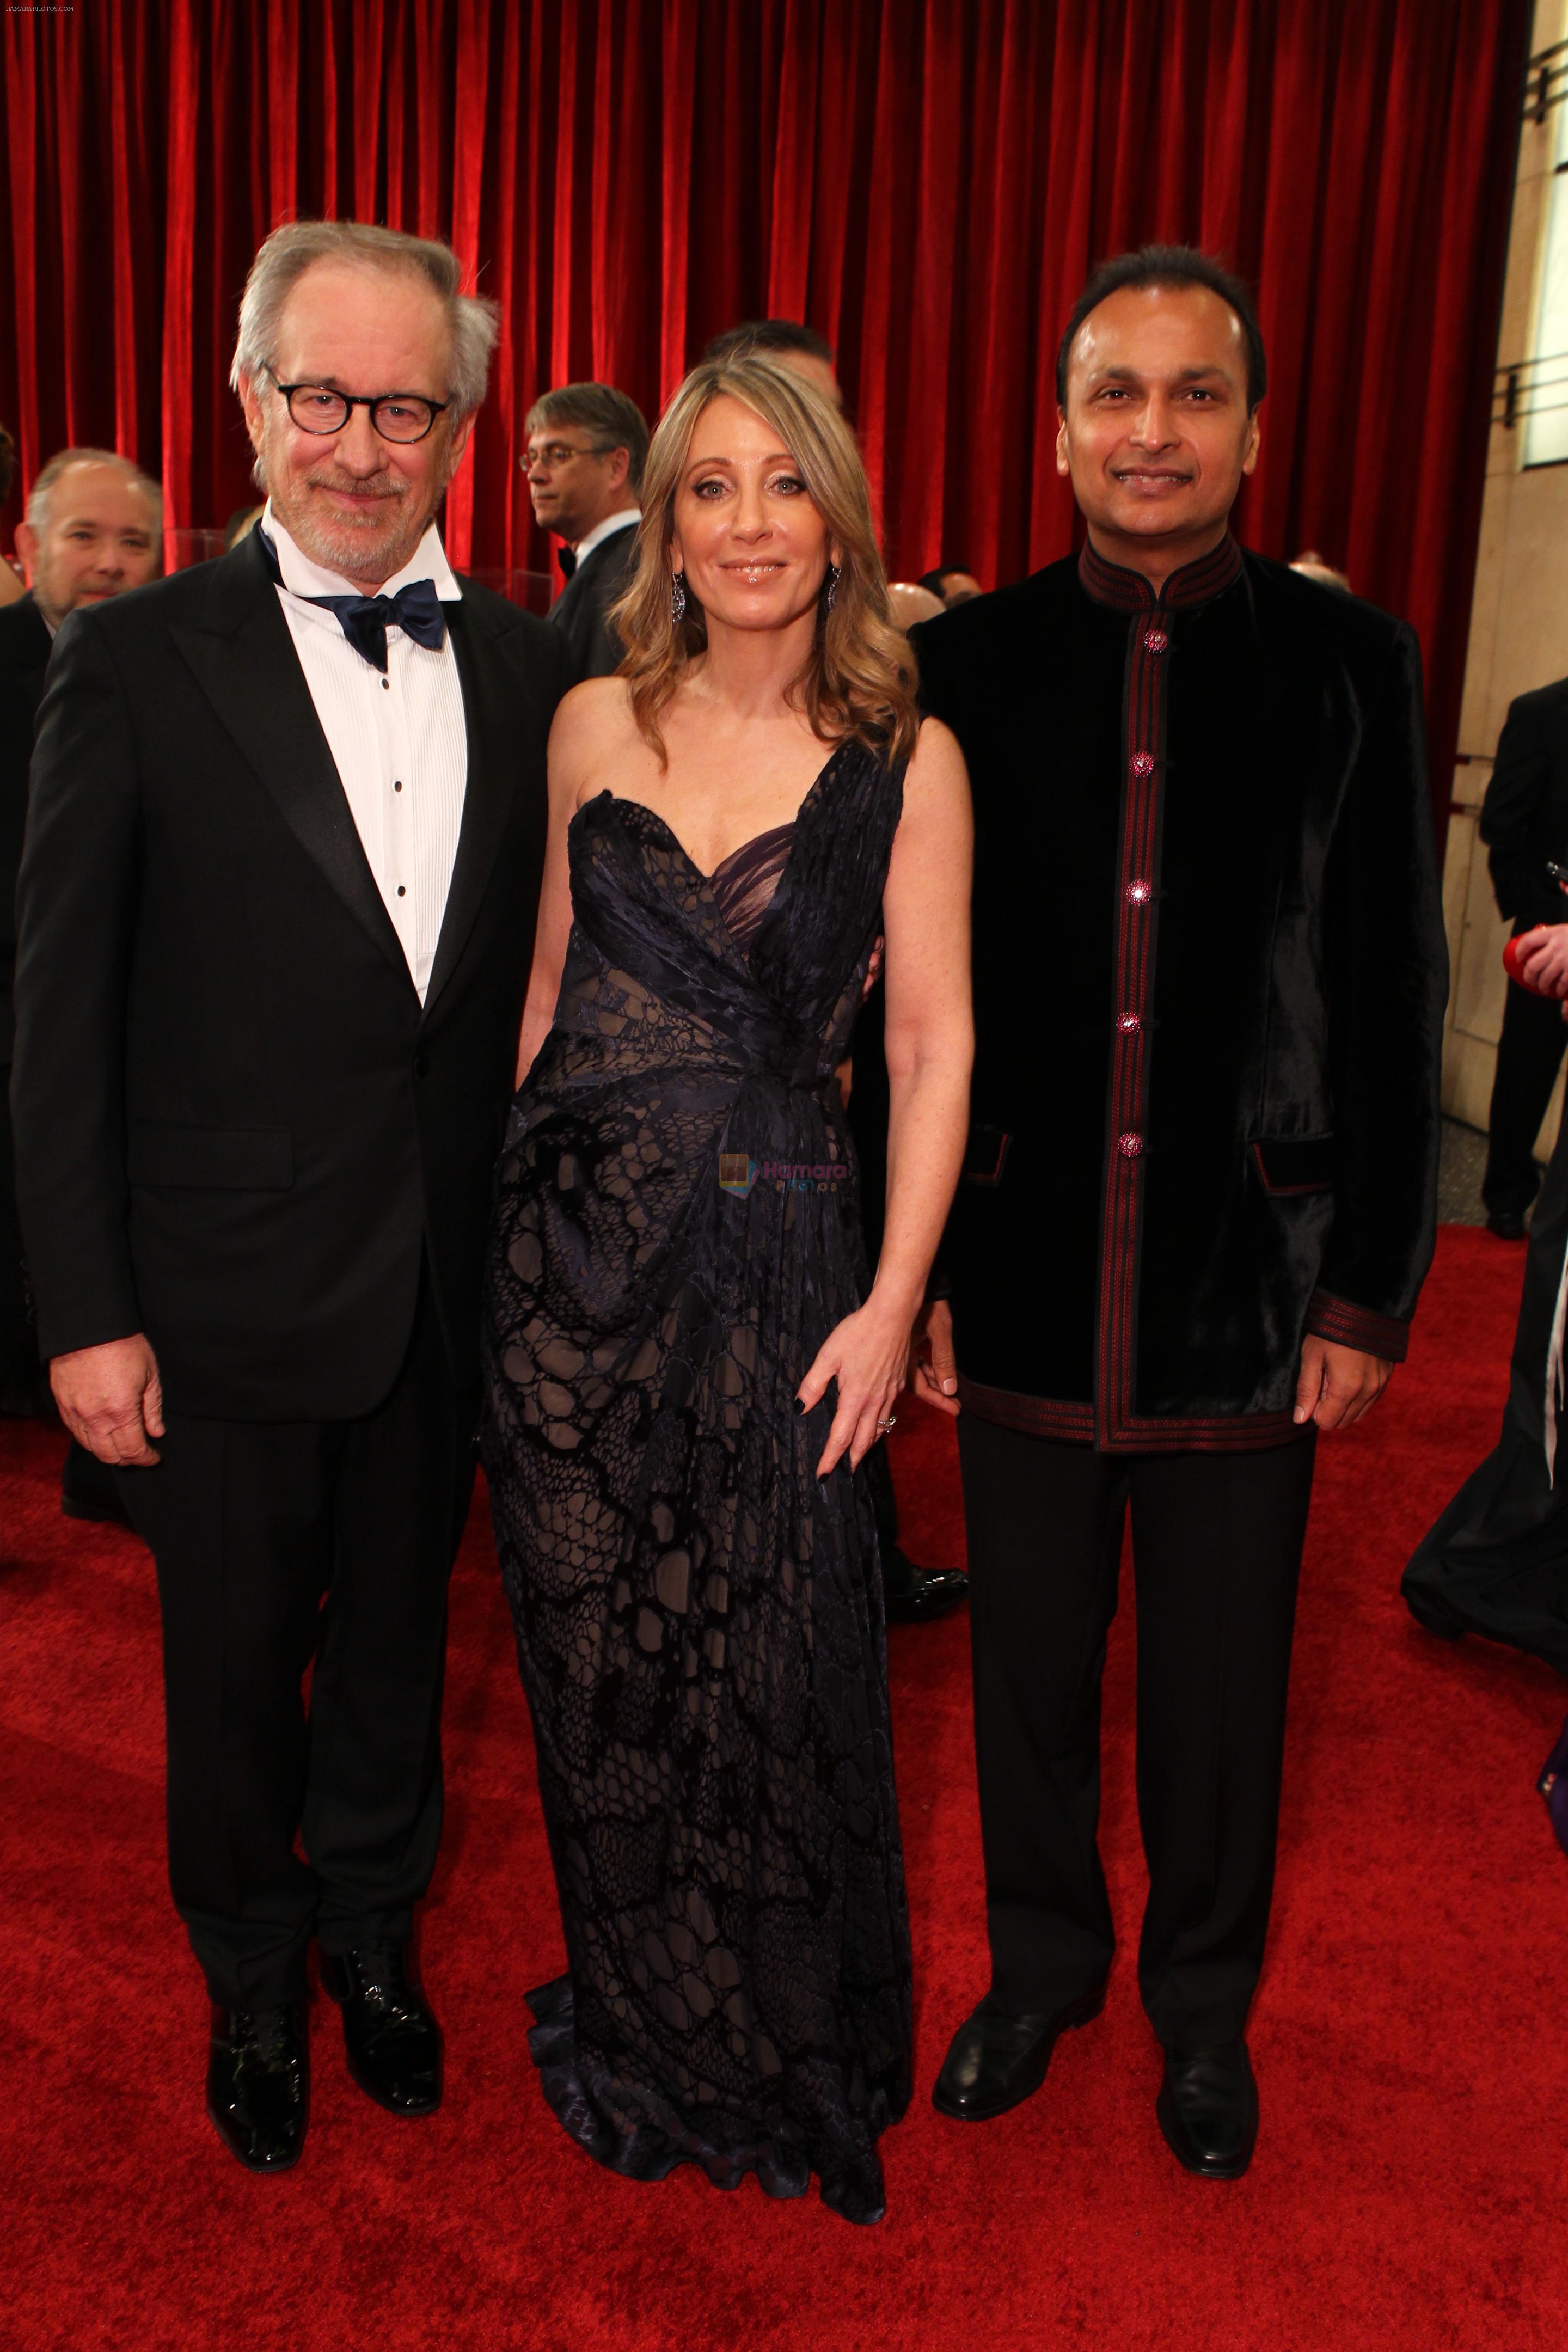 Steven Spielberg, Stacey Snider and Anil Ambani